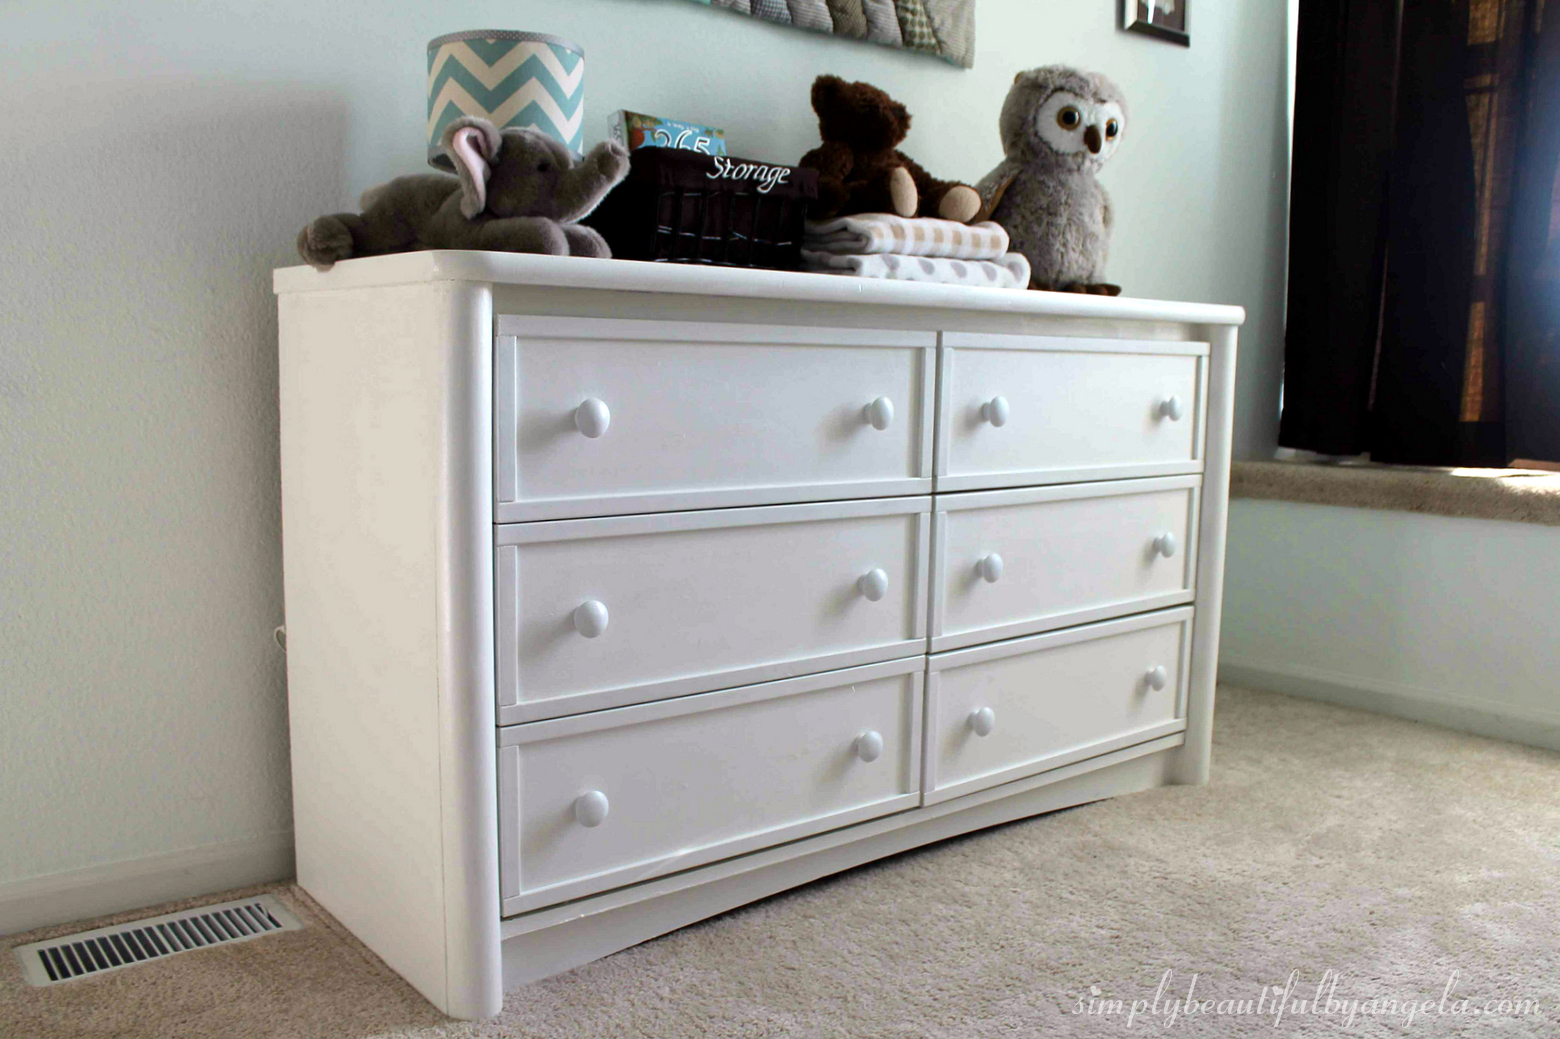 The Ugly Dresser Transformation Simply Beautiful By Angela